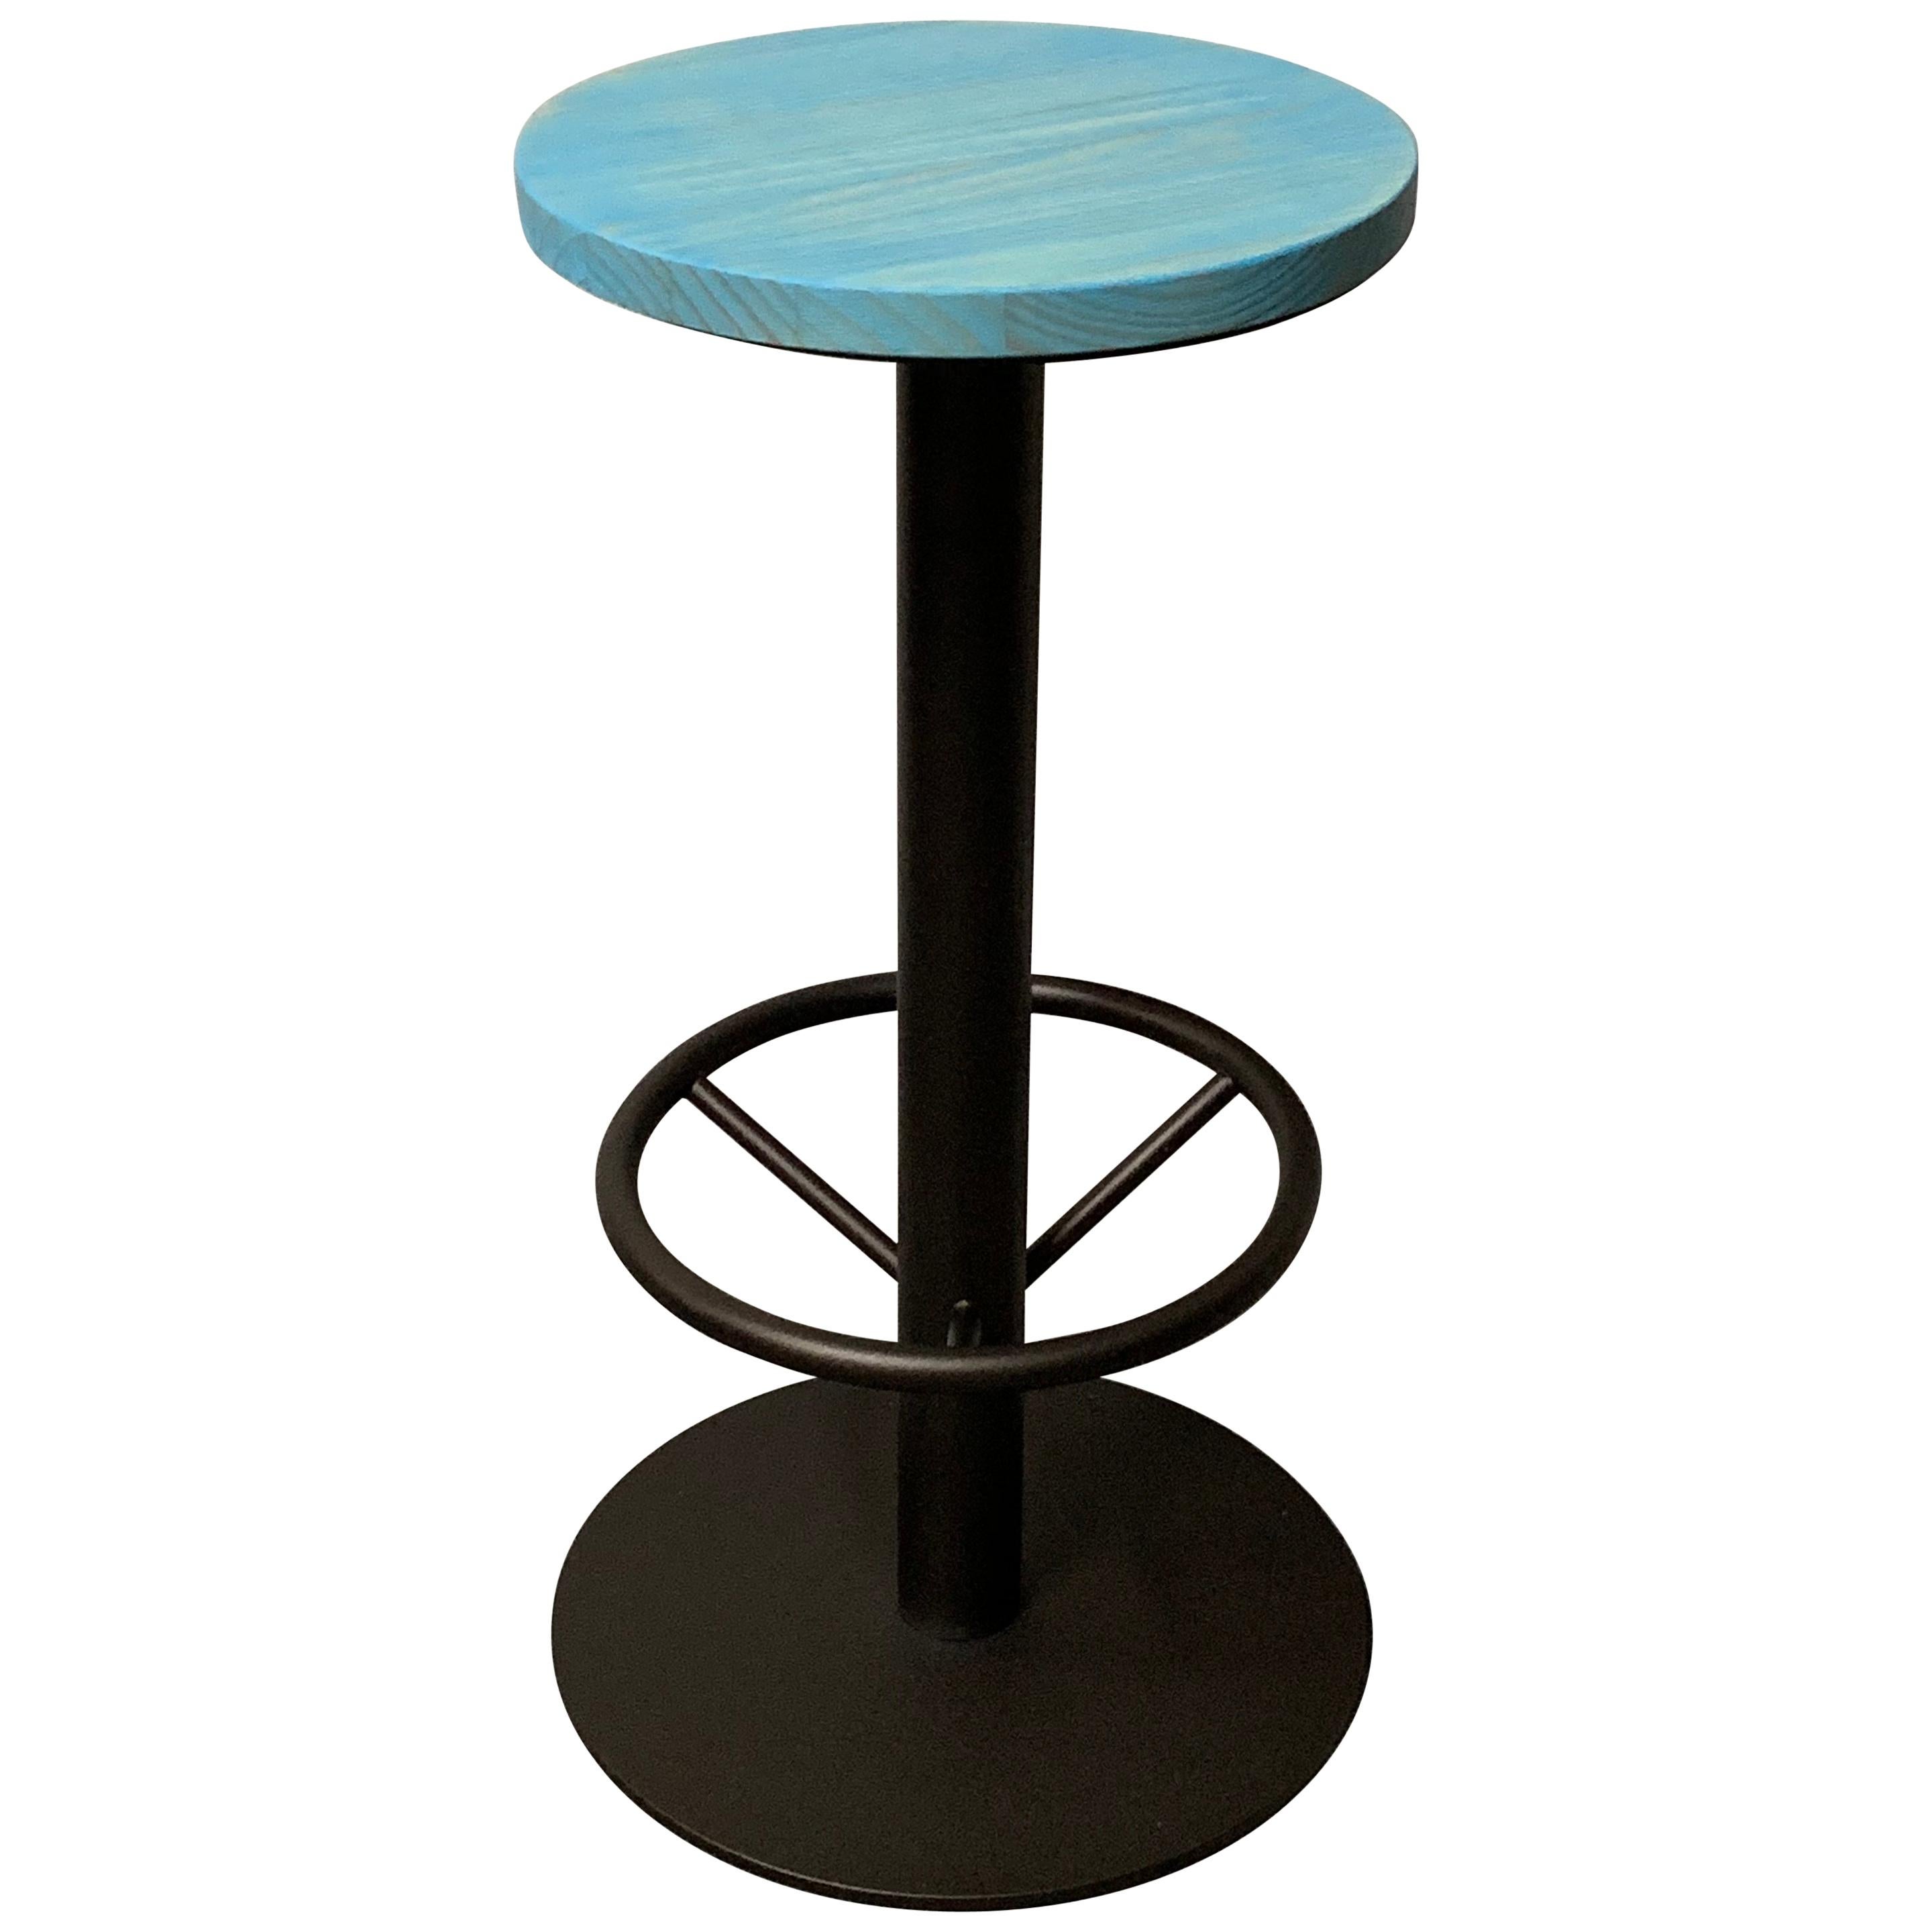 New Industrial Wrought Iron Shop Stool with Turquoise Wood Seat For Sale